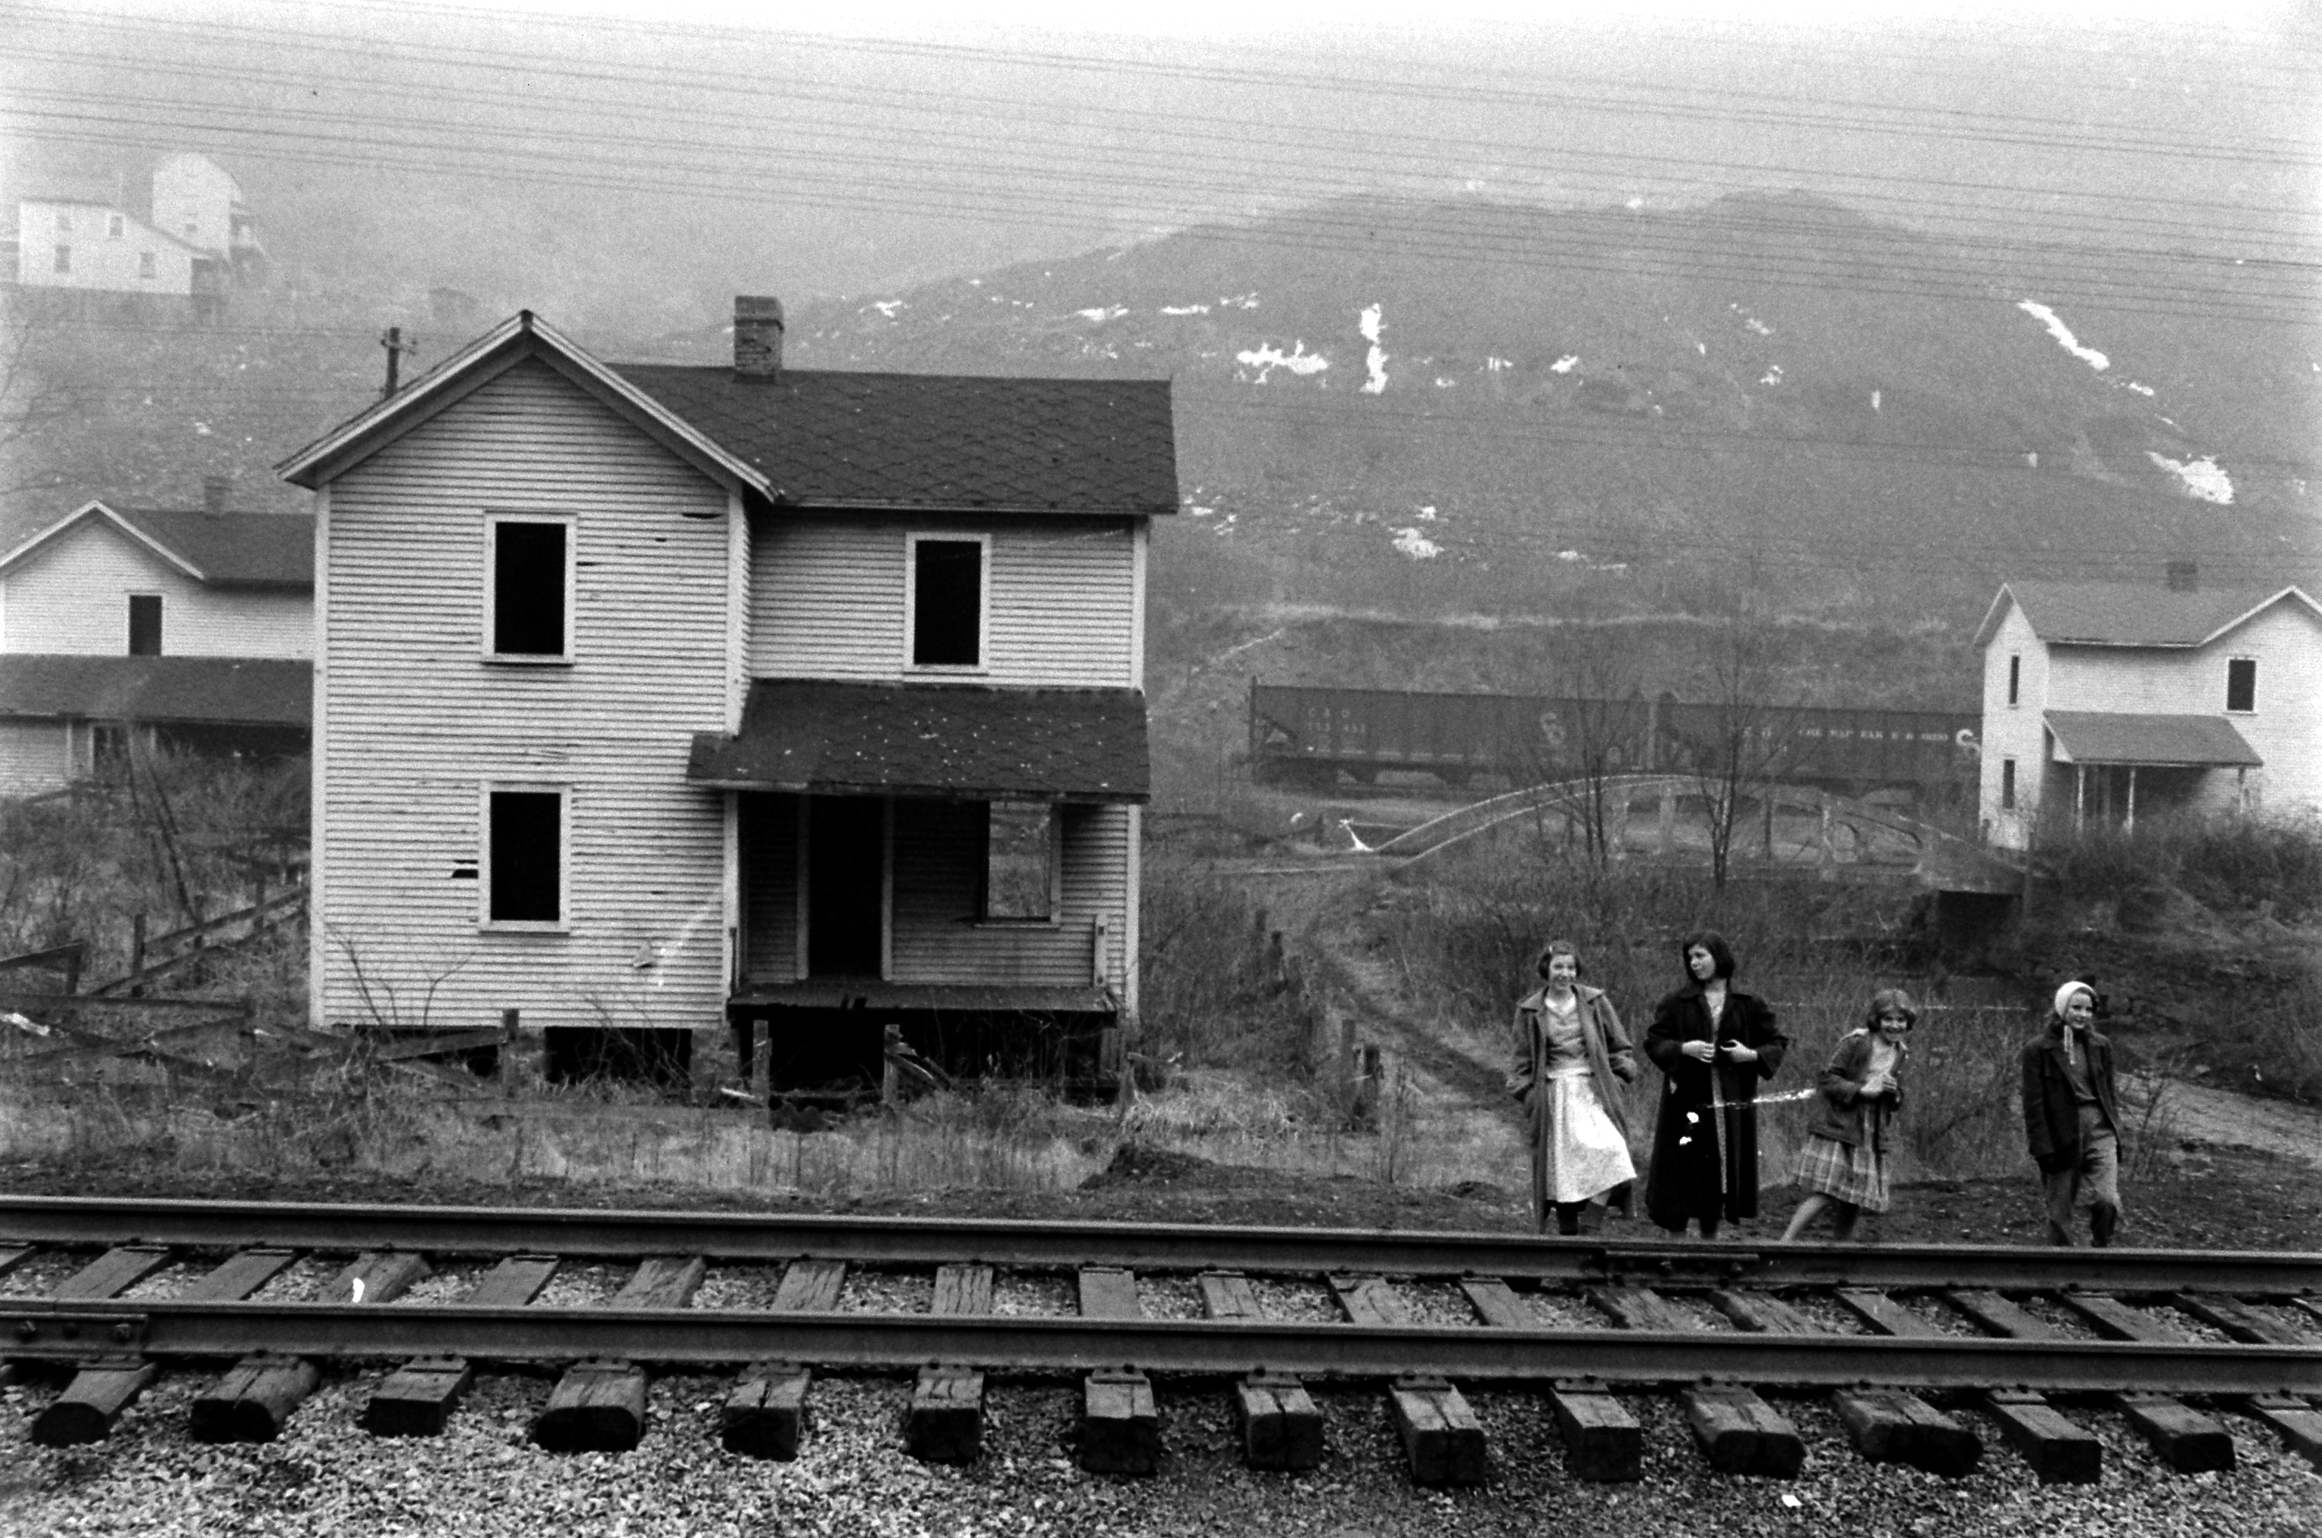 Poverty in mining towns in Kentucky and West Virgina in 1959.